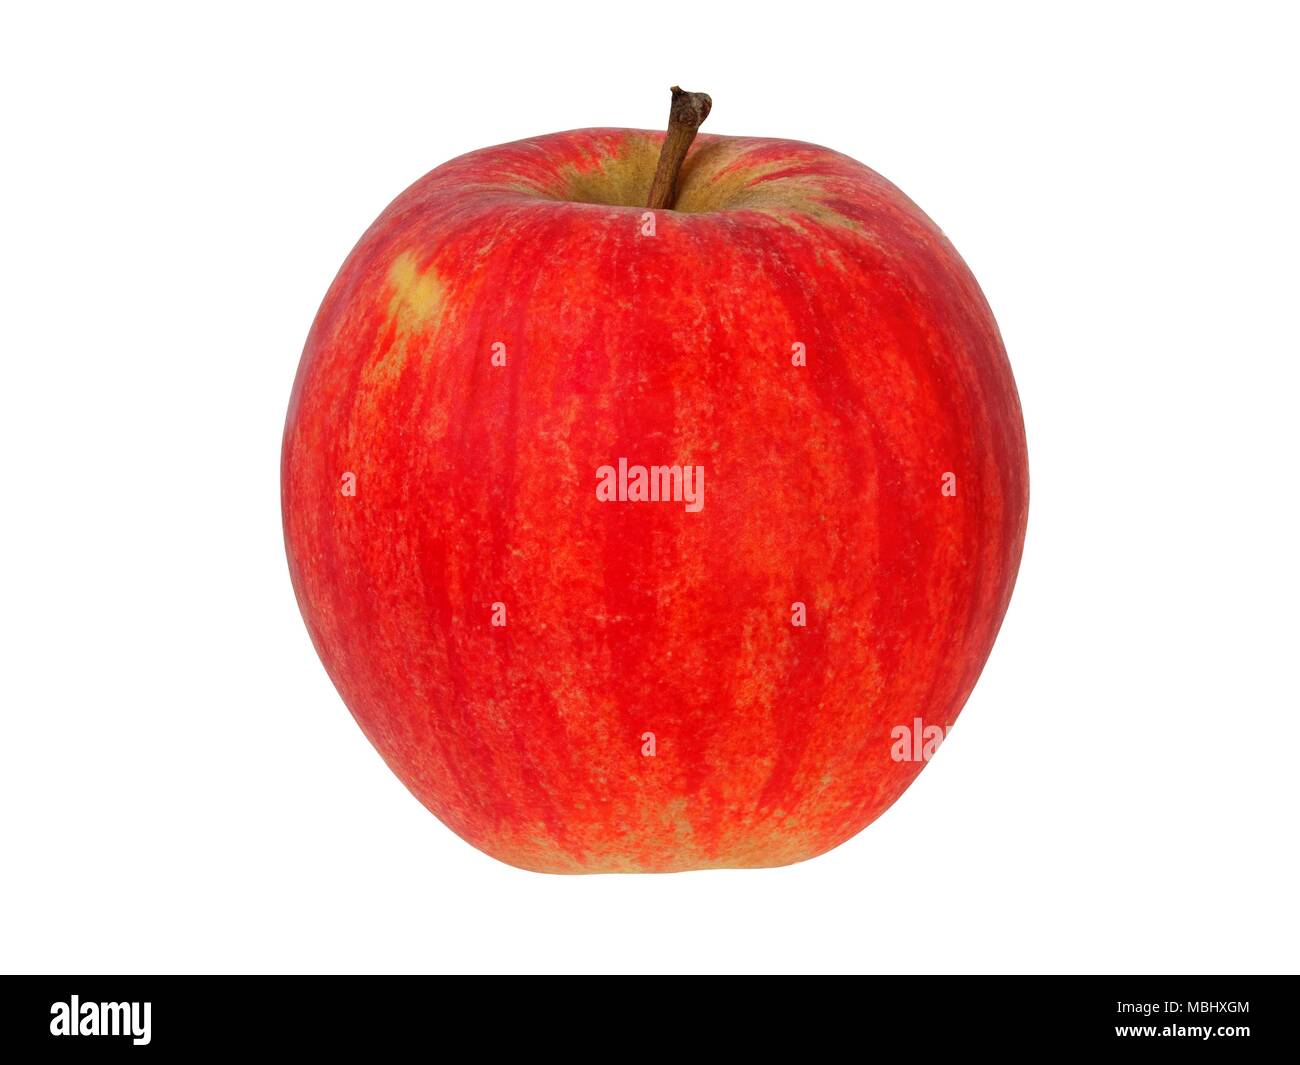 Big red apple isolated on white background Stock Photo